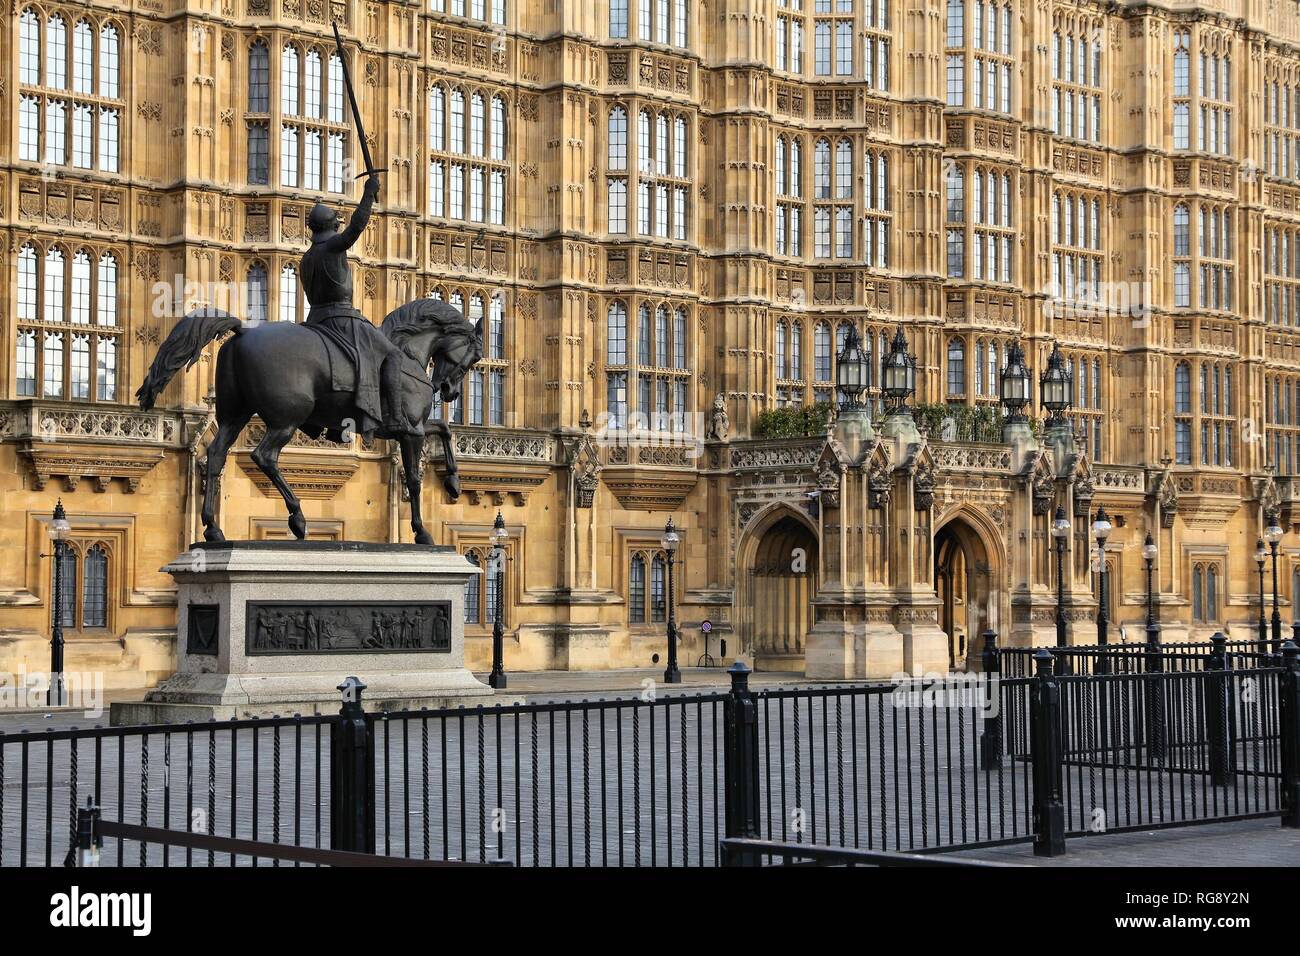 London, England - Palace of Westminster (Houses of Parliament). Stock Photo